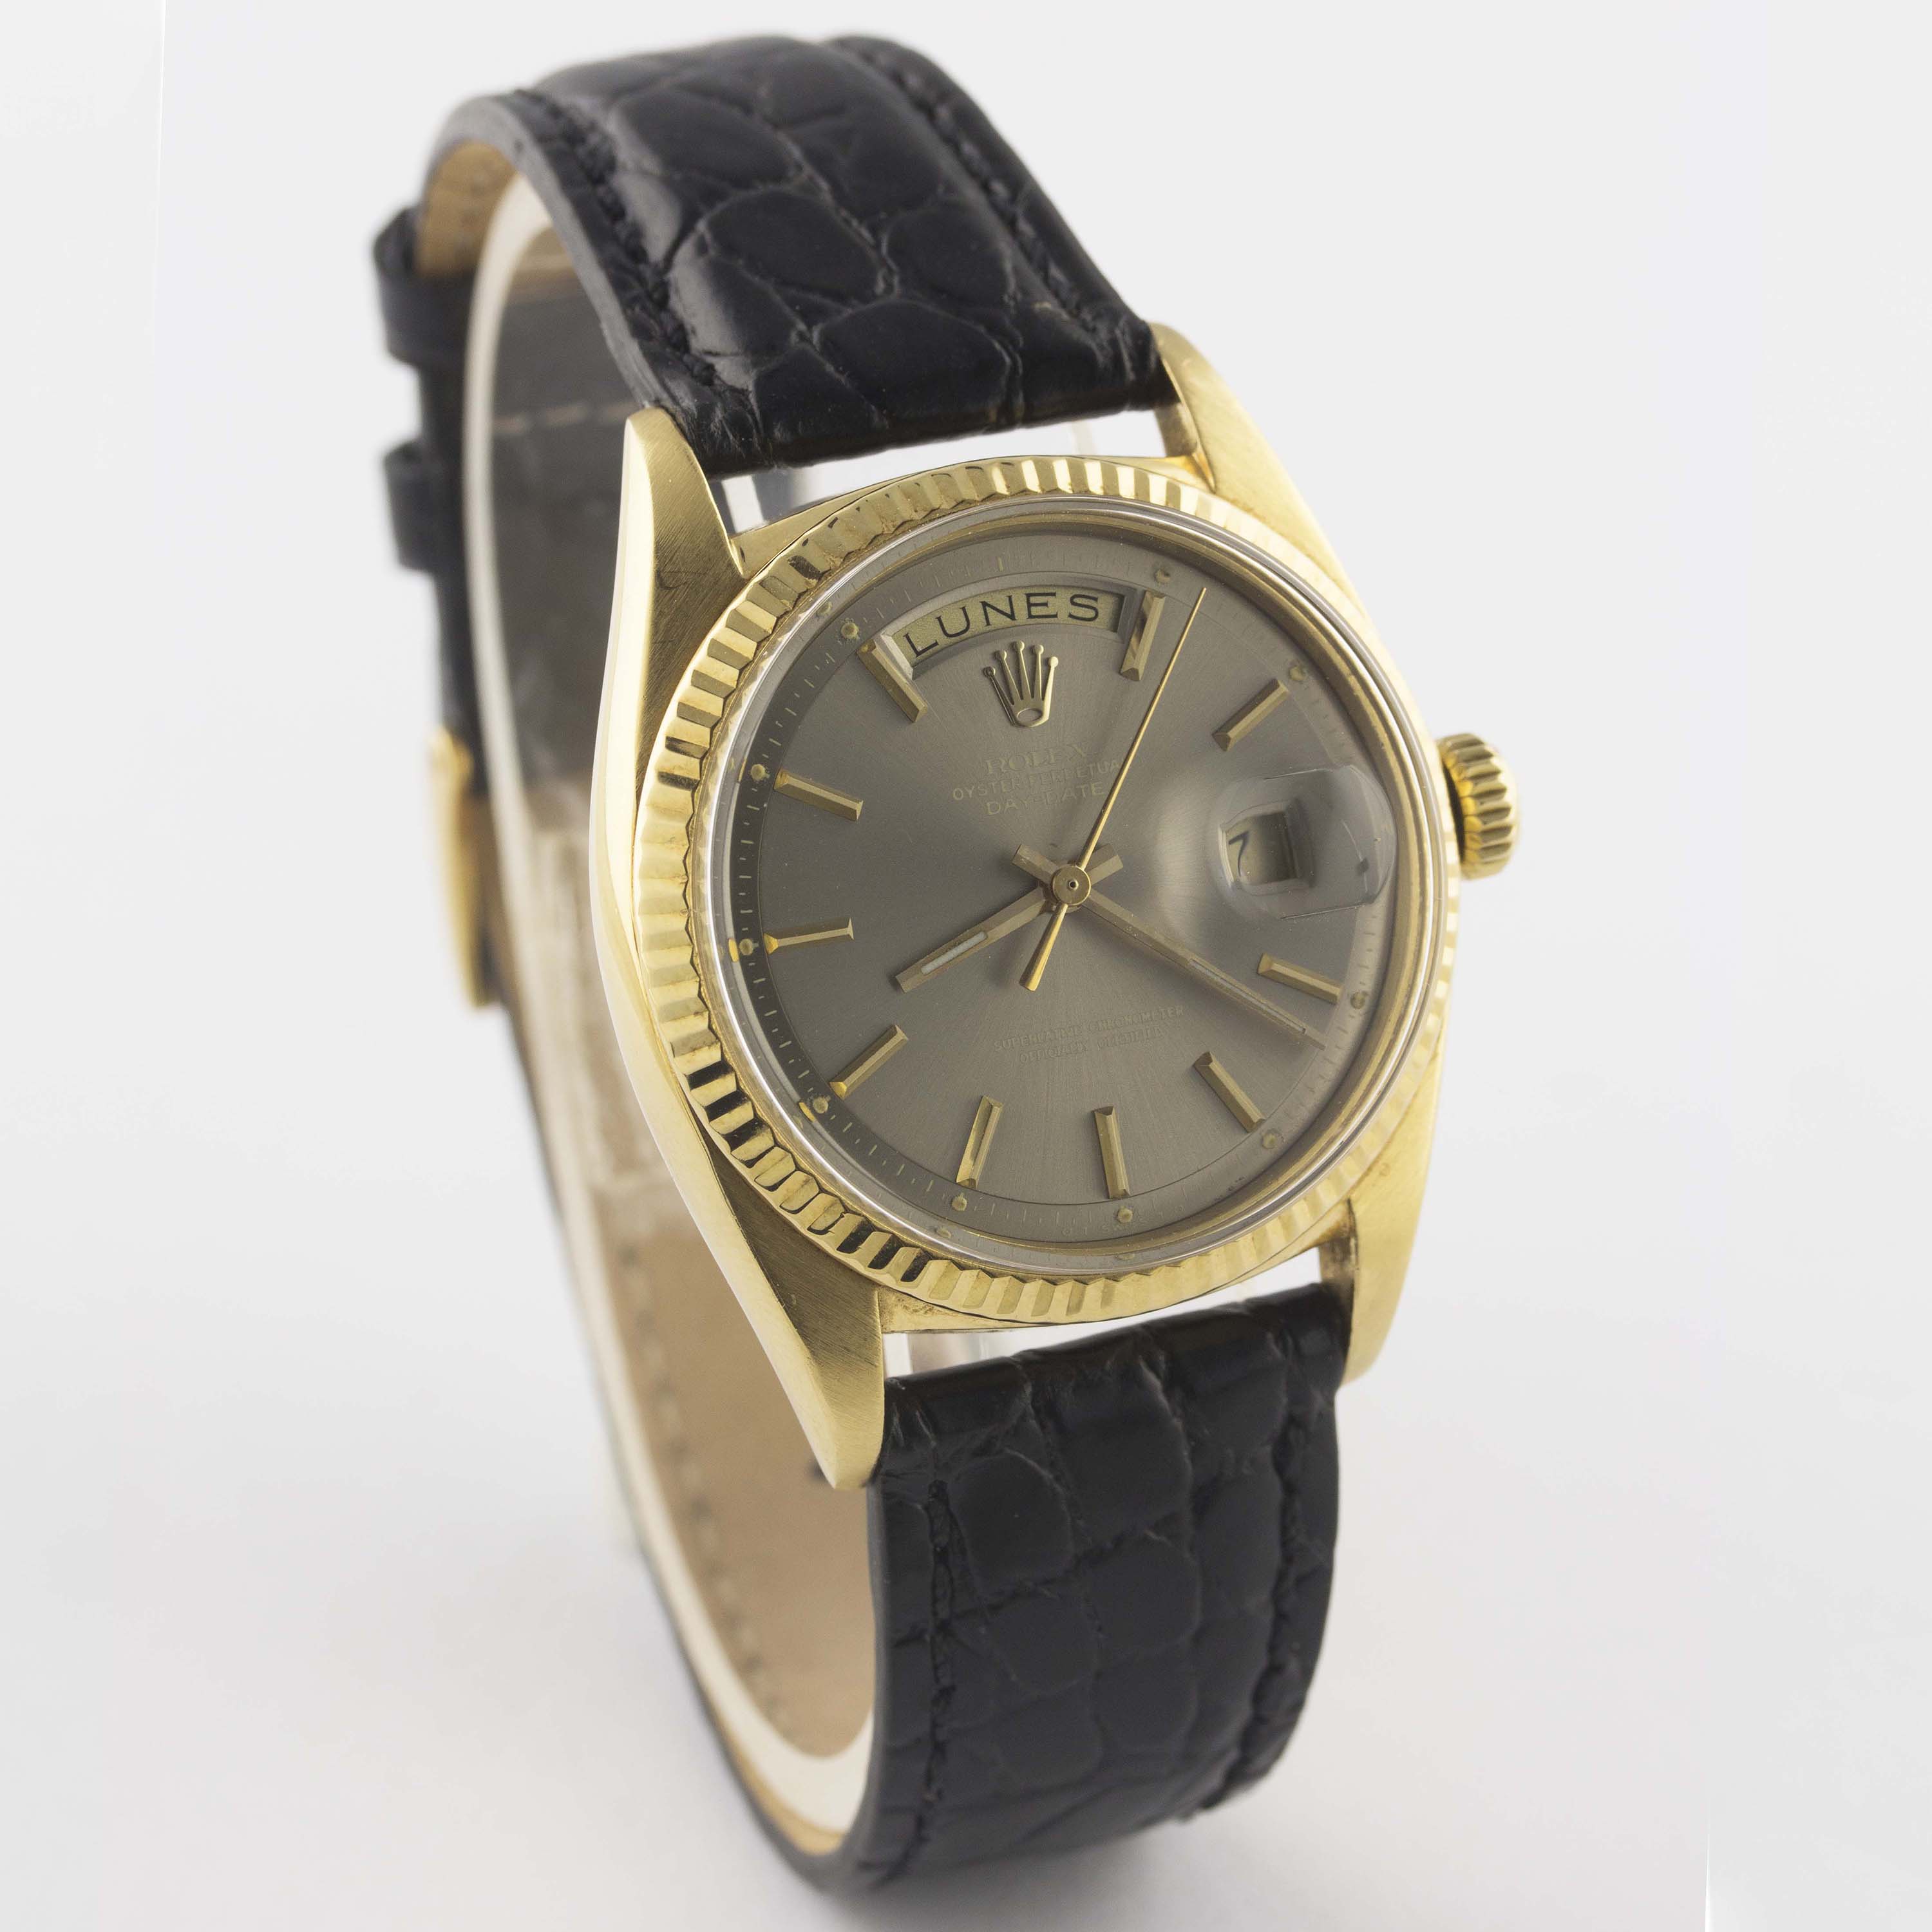 A RARE GENTLEMAN'S 18K SOLID GOLD ROLEX OYSTER PERPETUAL DAY DATE WRIST WATCH CIRCA 1972, REF. - Image 5 of 11